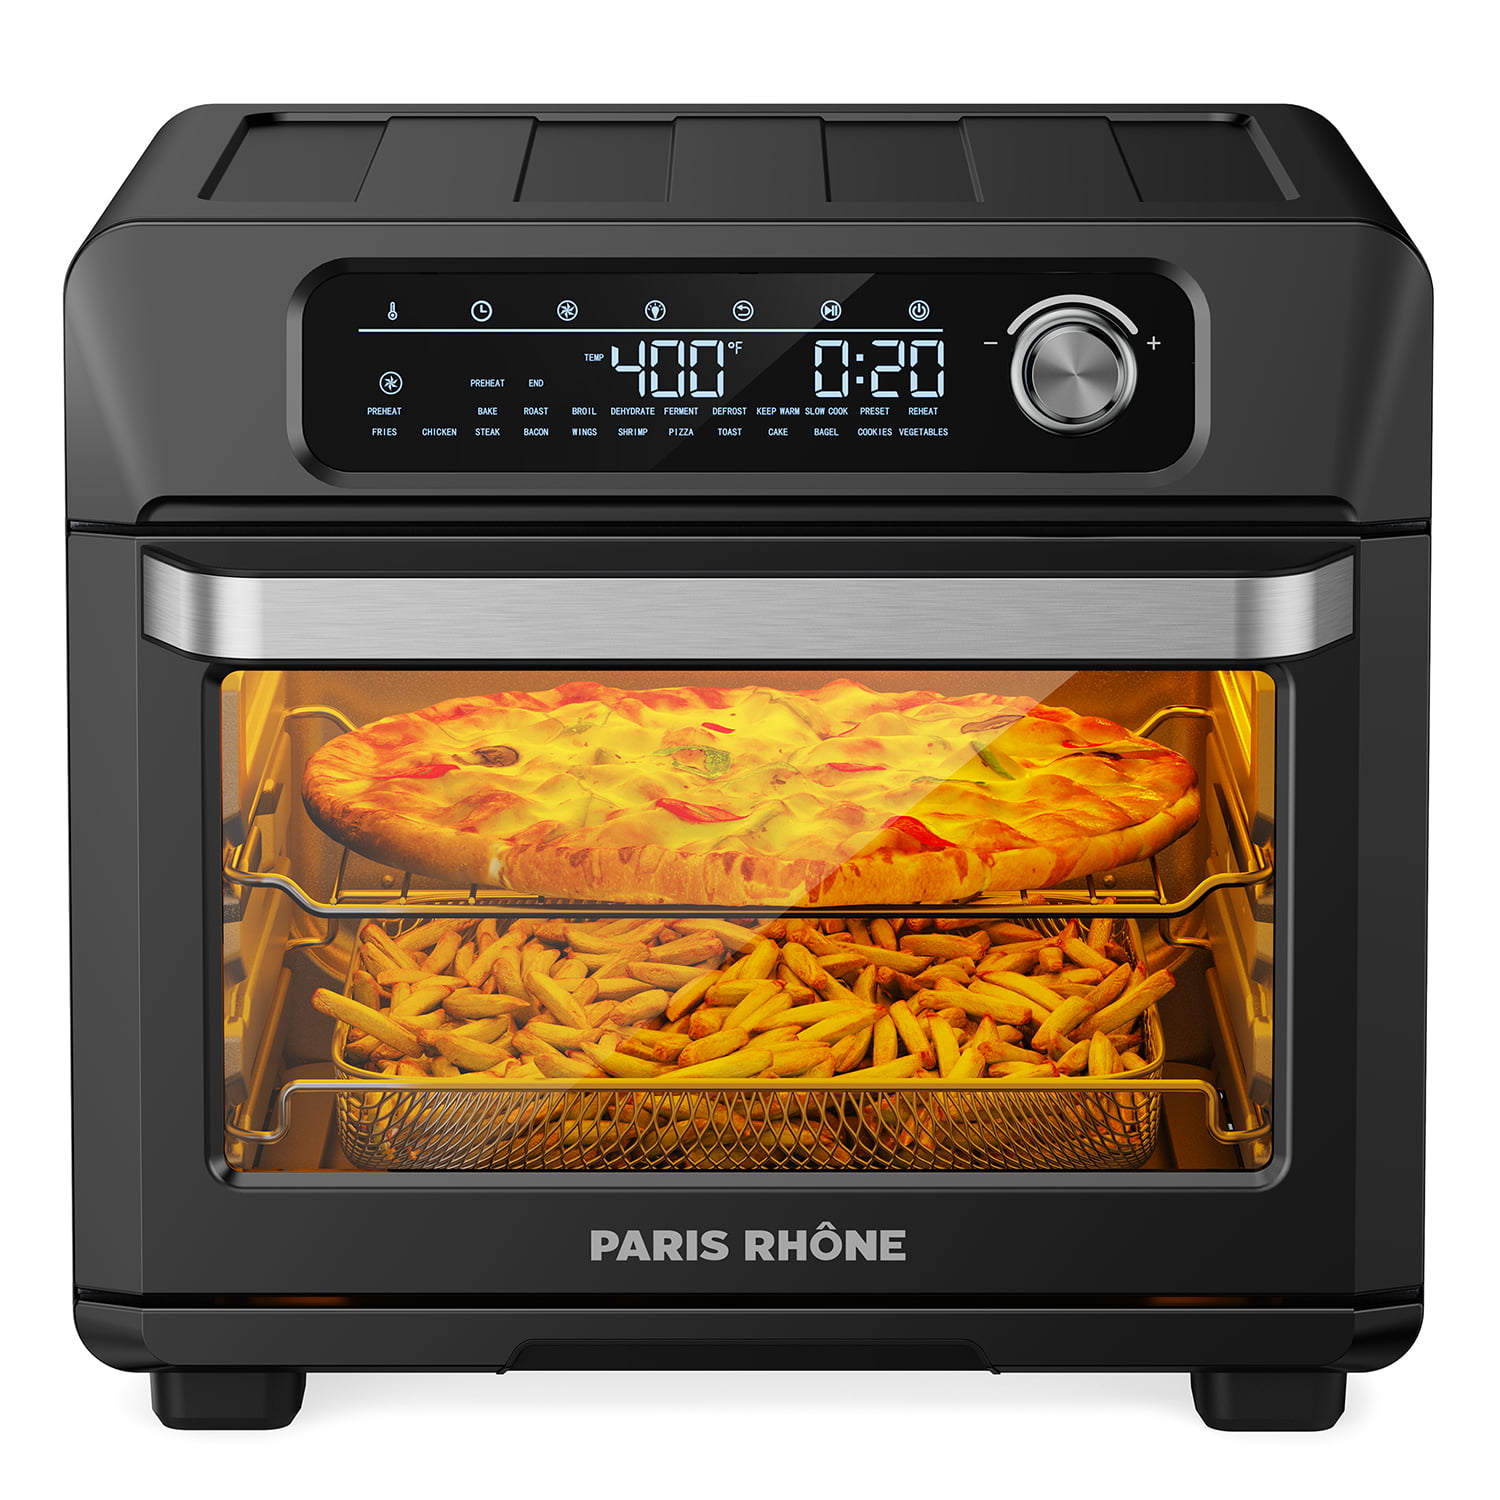 26QT Large Convection Air Fryer Oven with Recipes